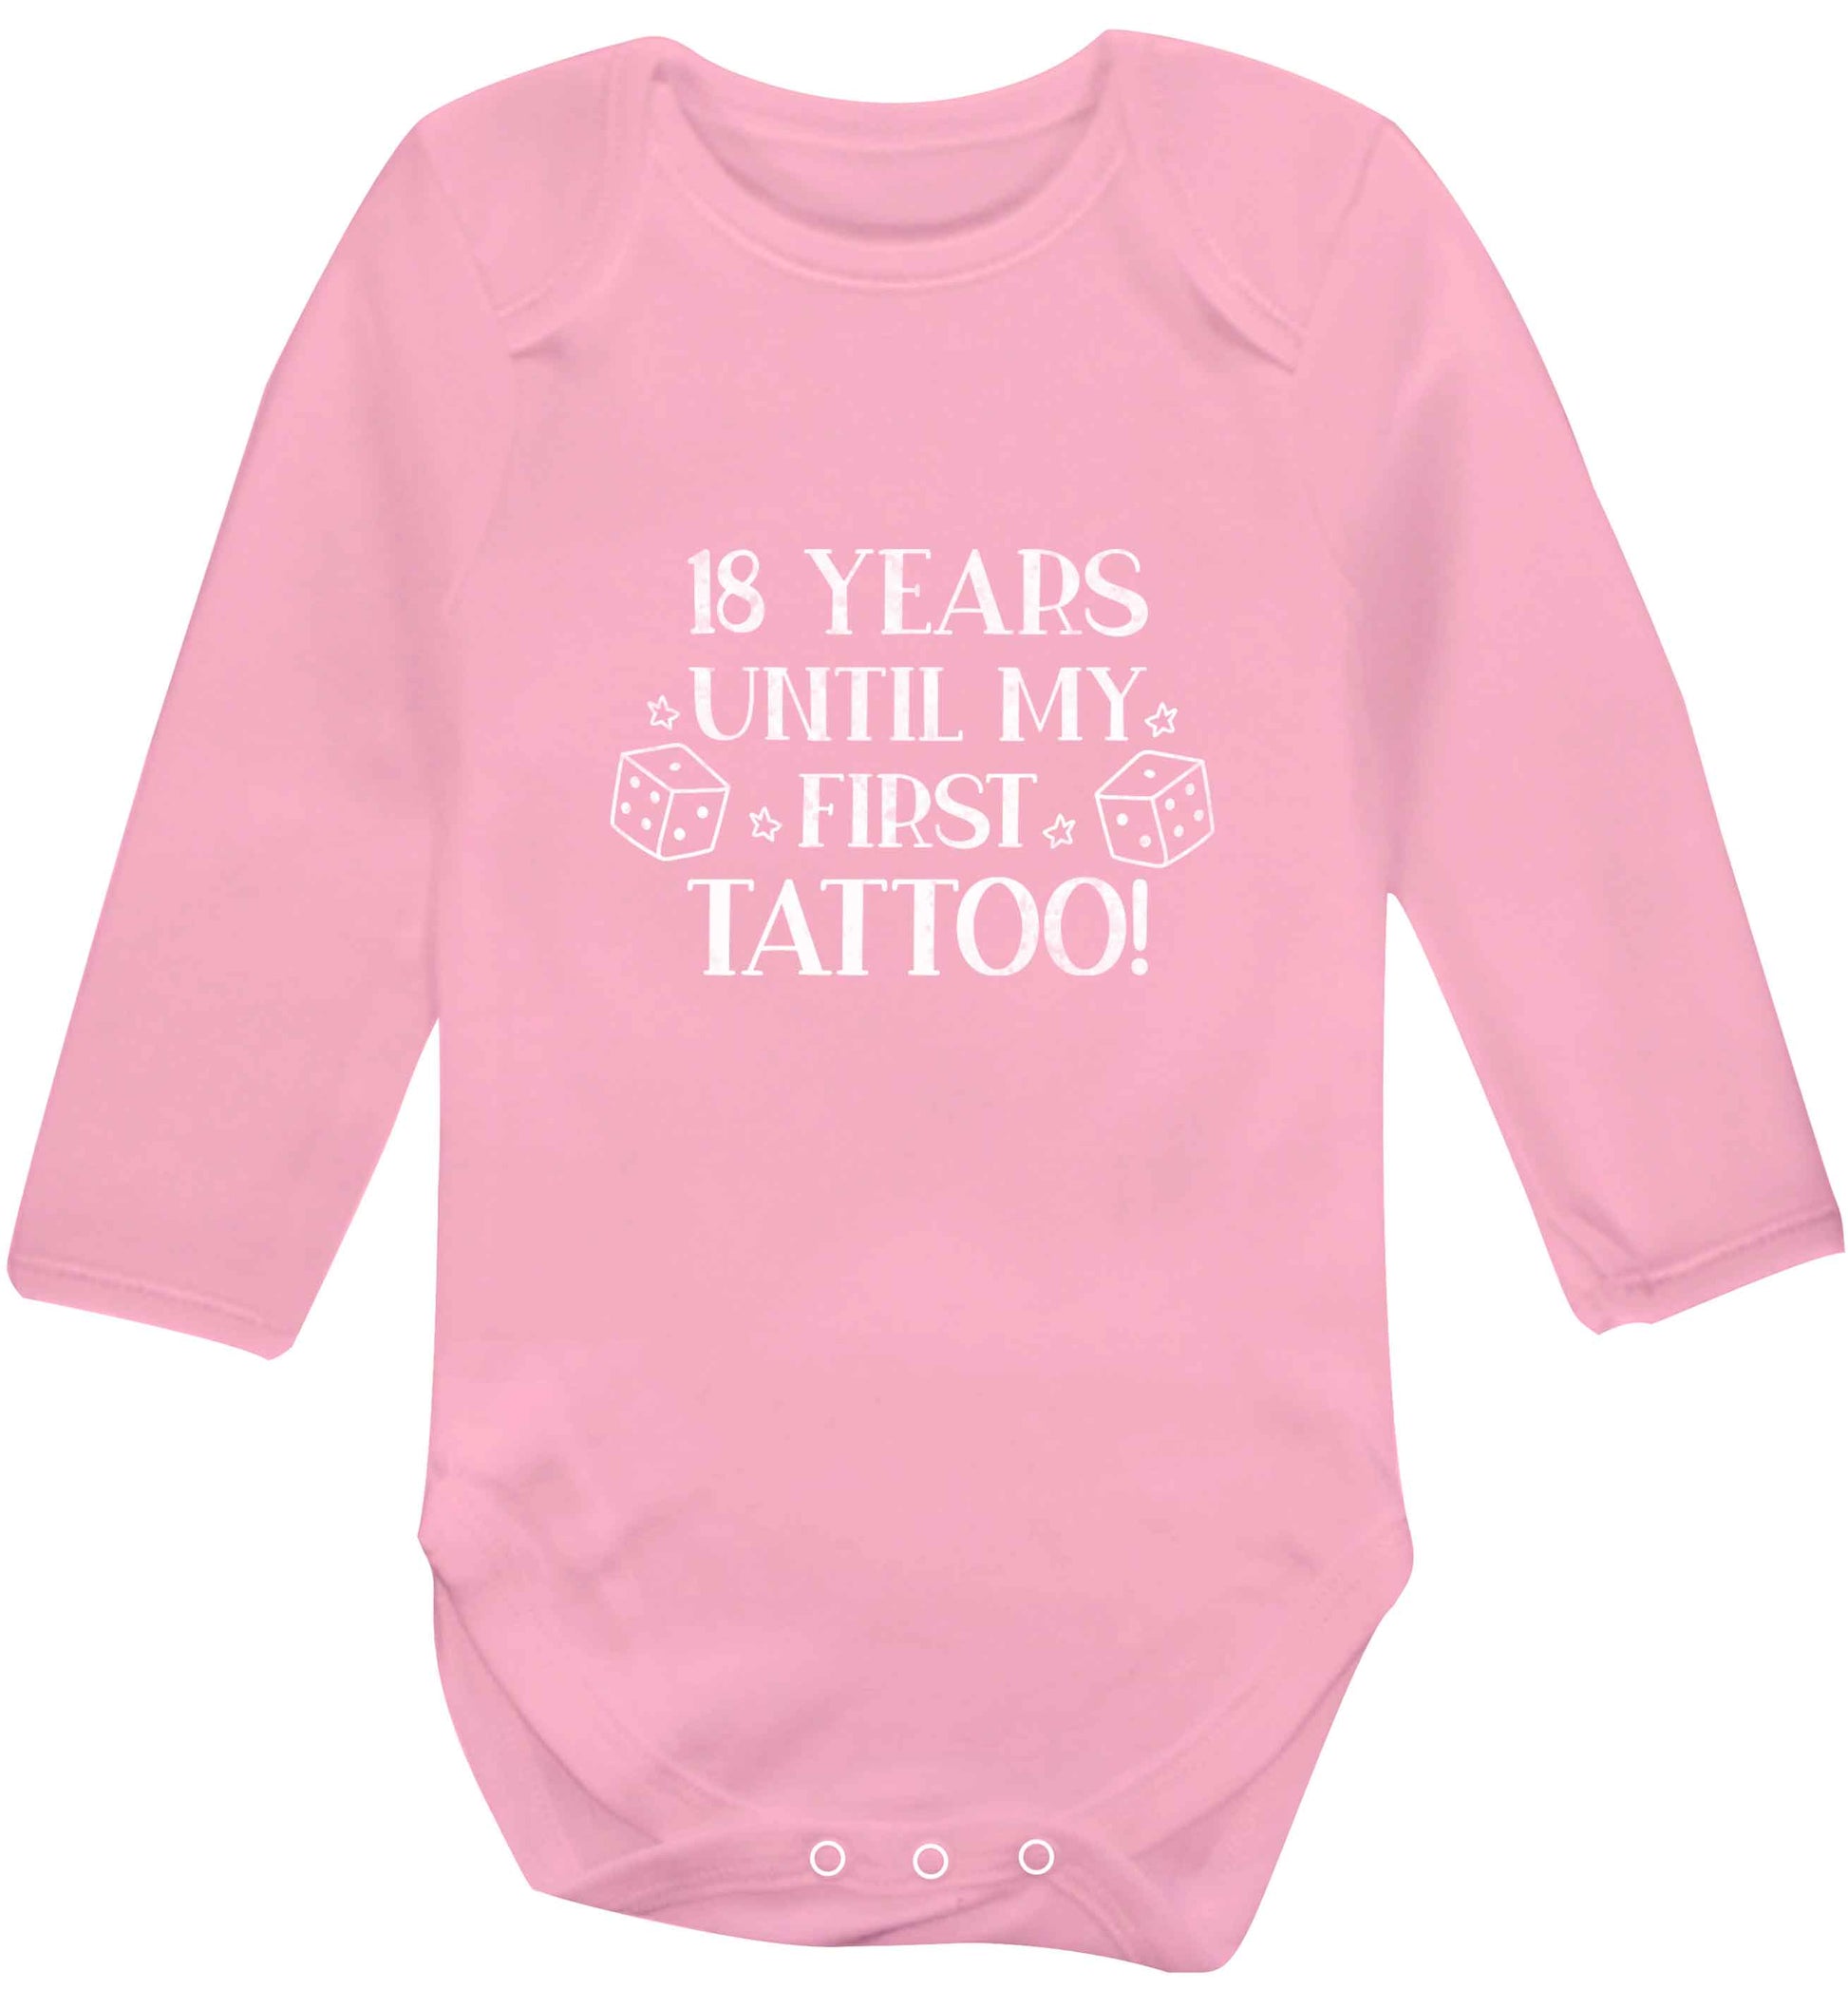 18 Years Until my First Tattoo baby vest long sleeved pale pink 6-12 months